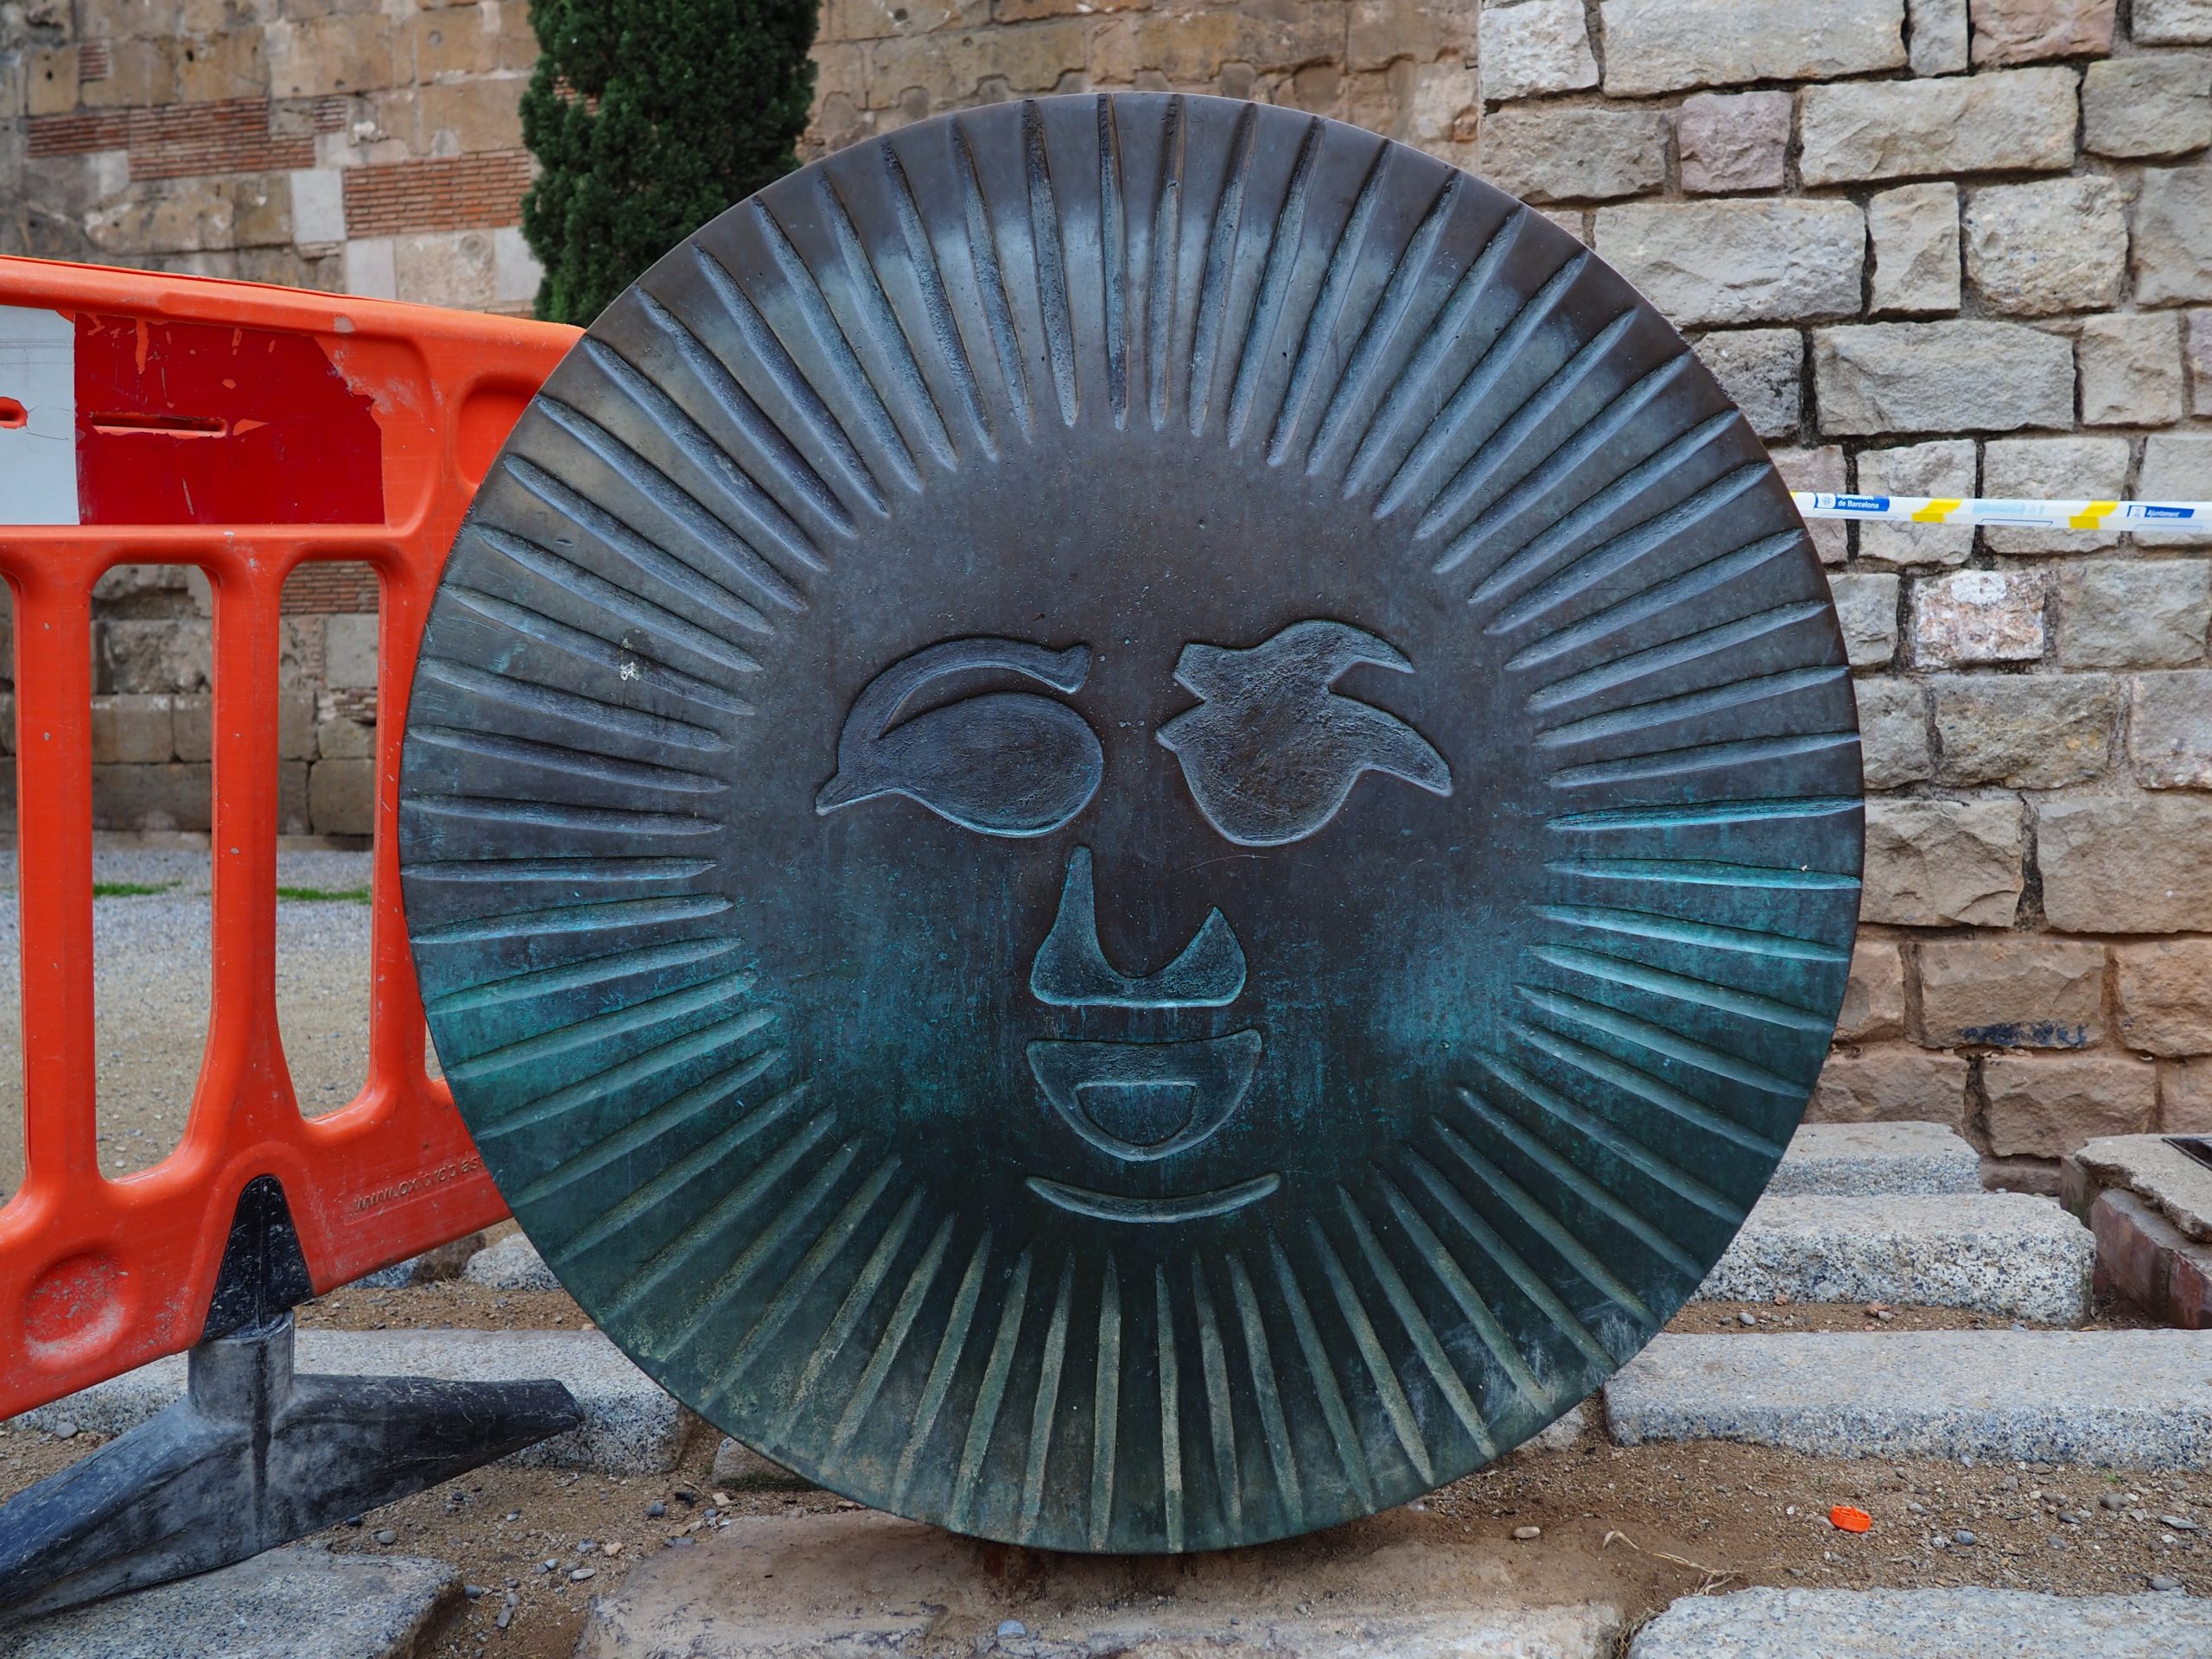 A sun sculpture on iron, the O letter on the Barcino sculpture. Barcelona treasure hunt. Gothic quarter.